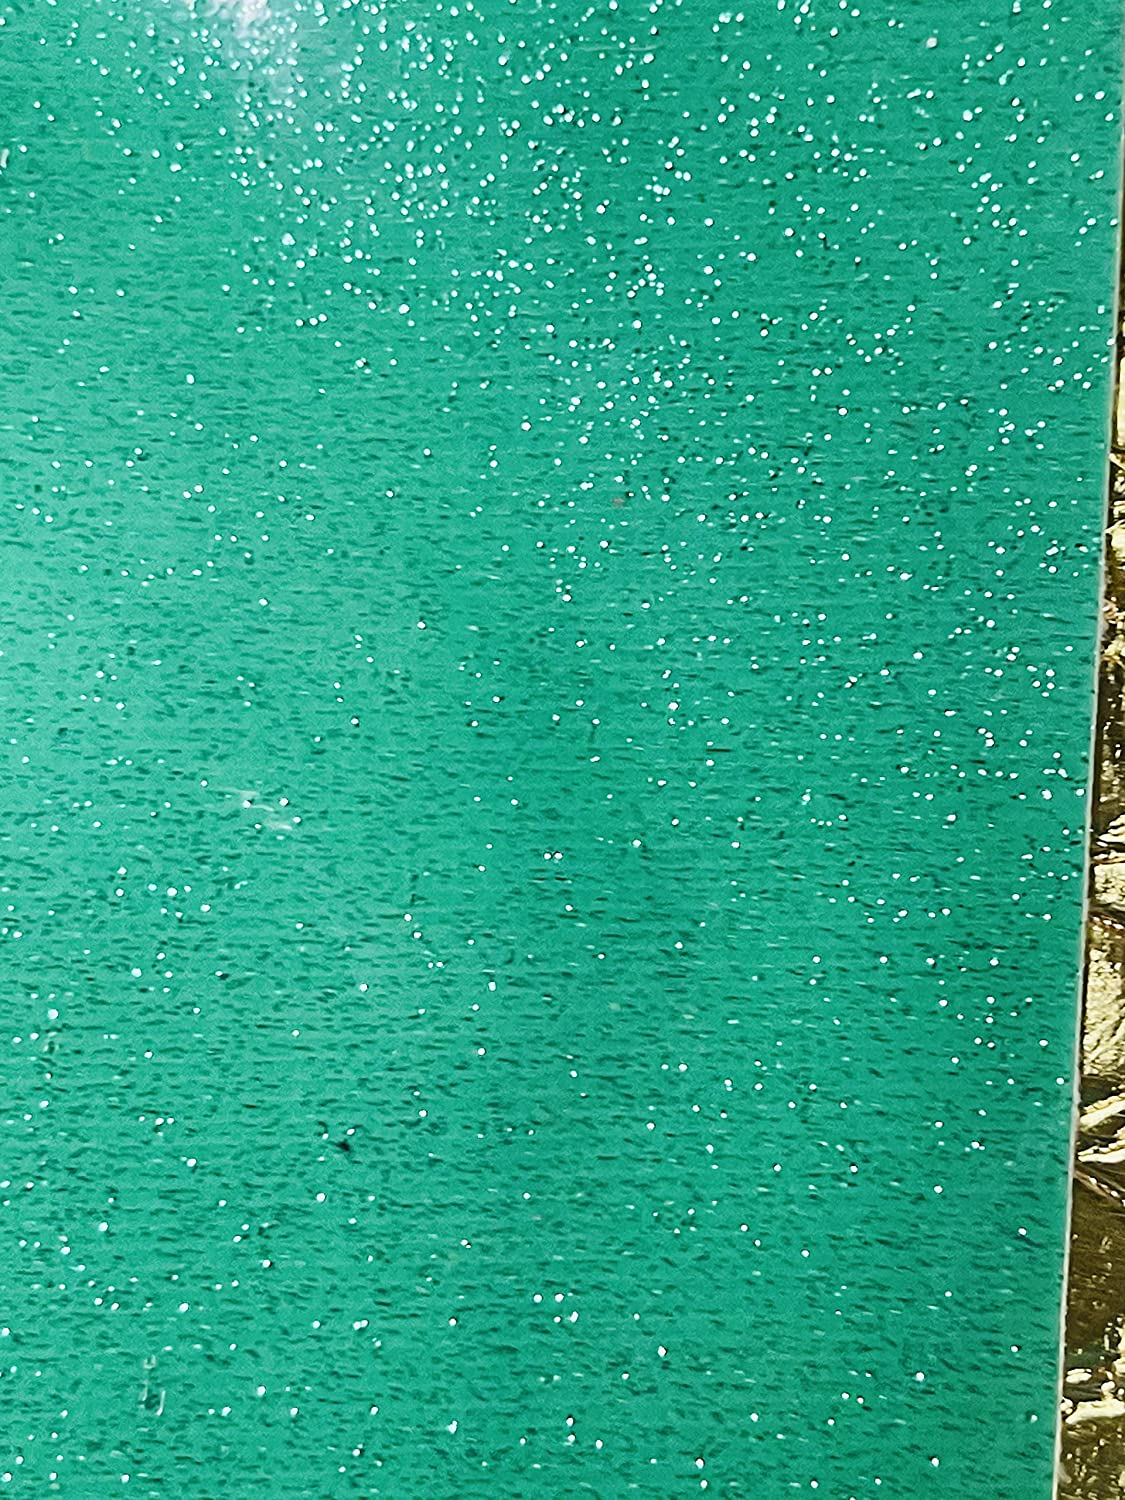 53/54" Wide Shiny Sparkle Glitter Vinyl, Faux Leather PVC-Upholstery Craft Fabric by The Yard (Aqua, 1 Yard)